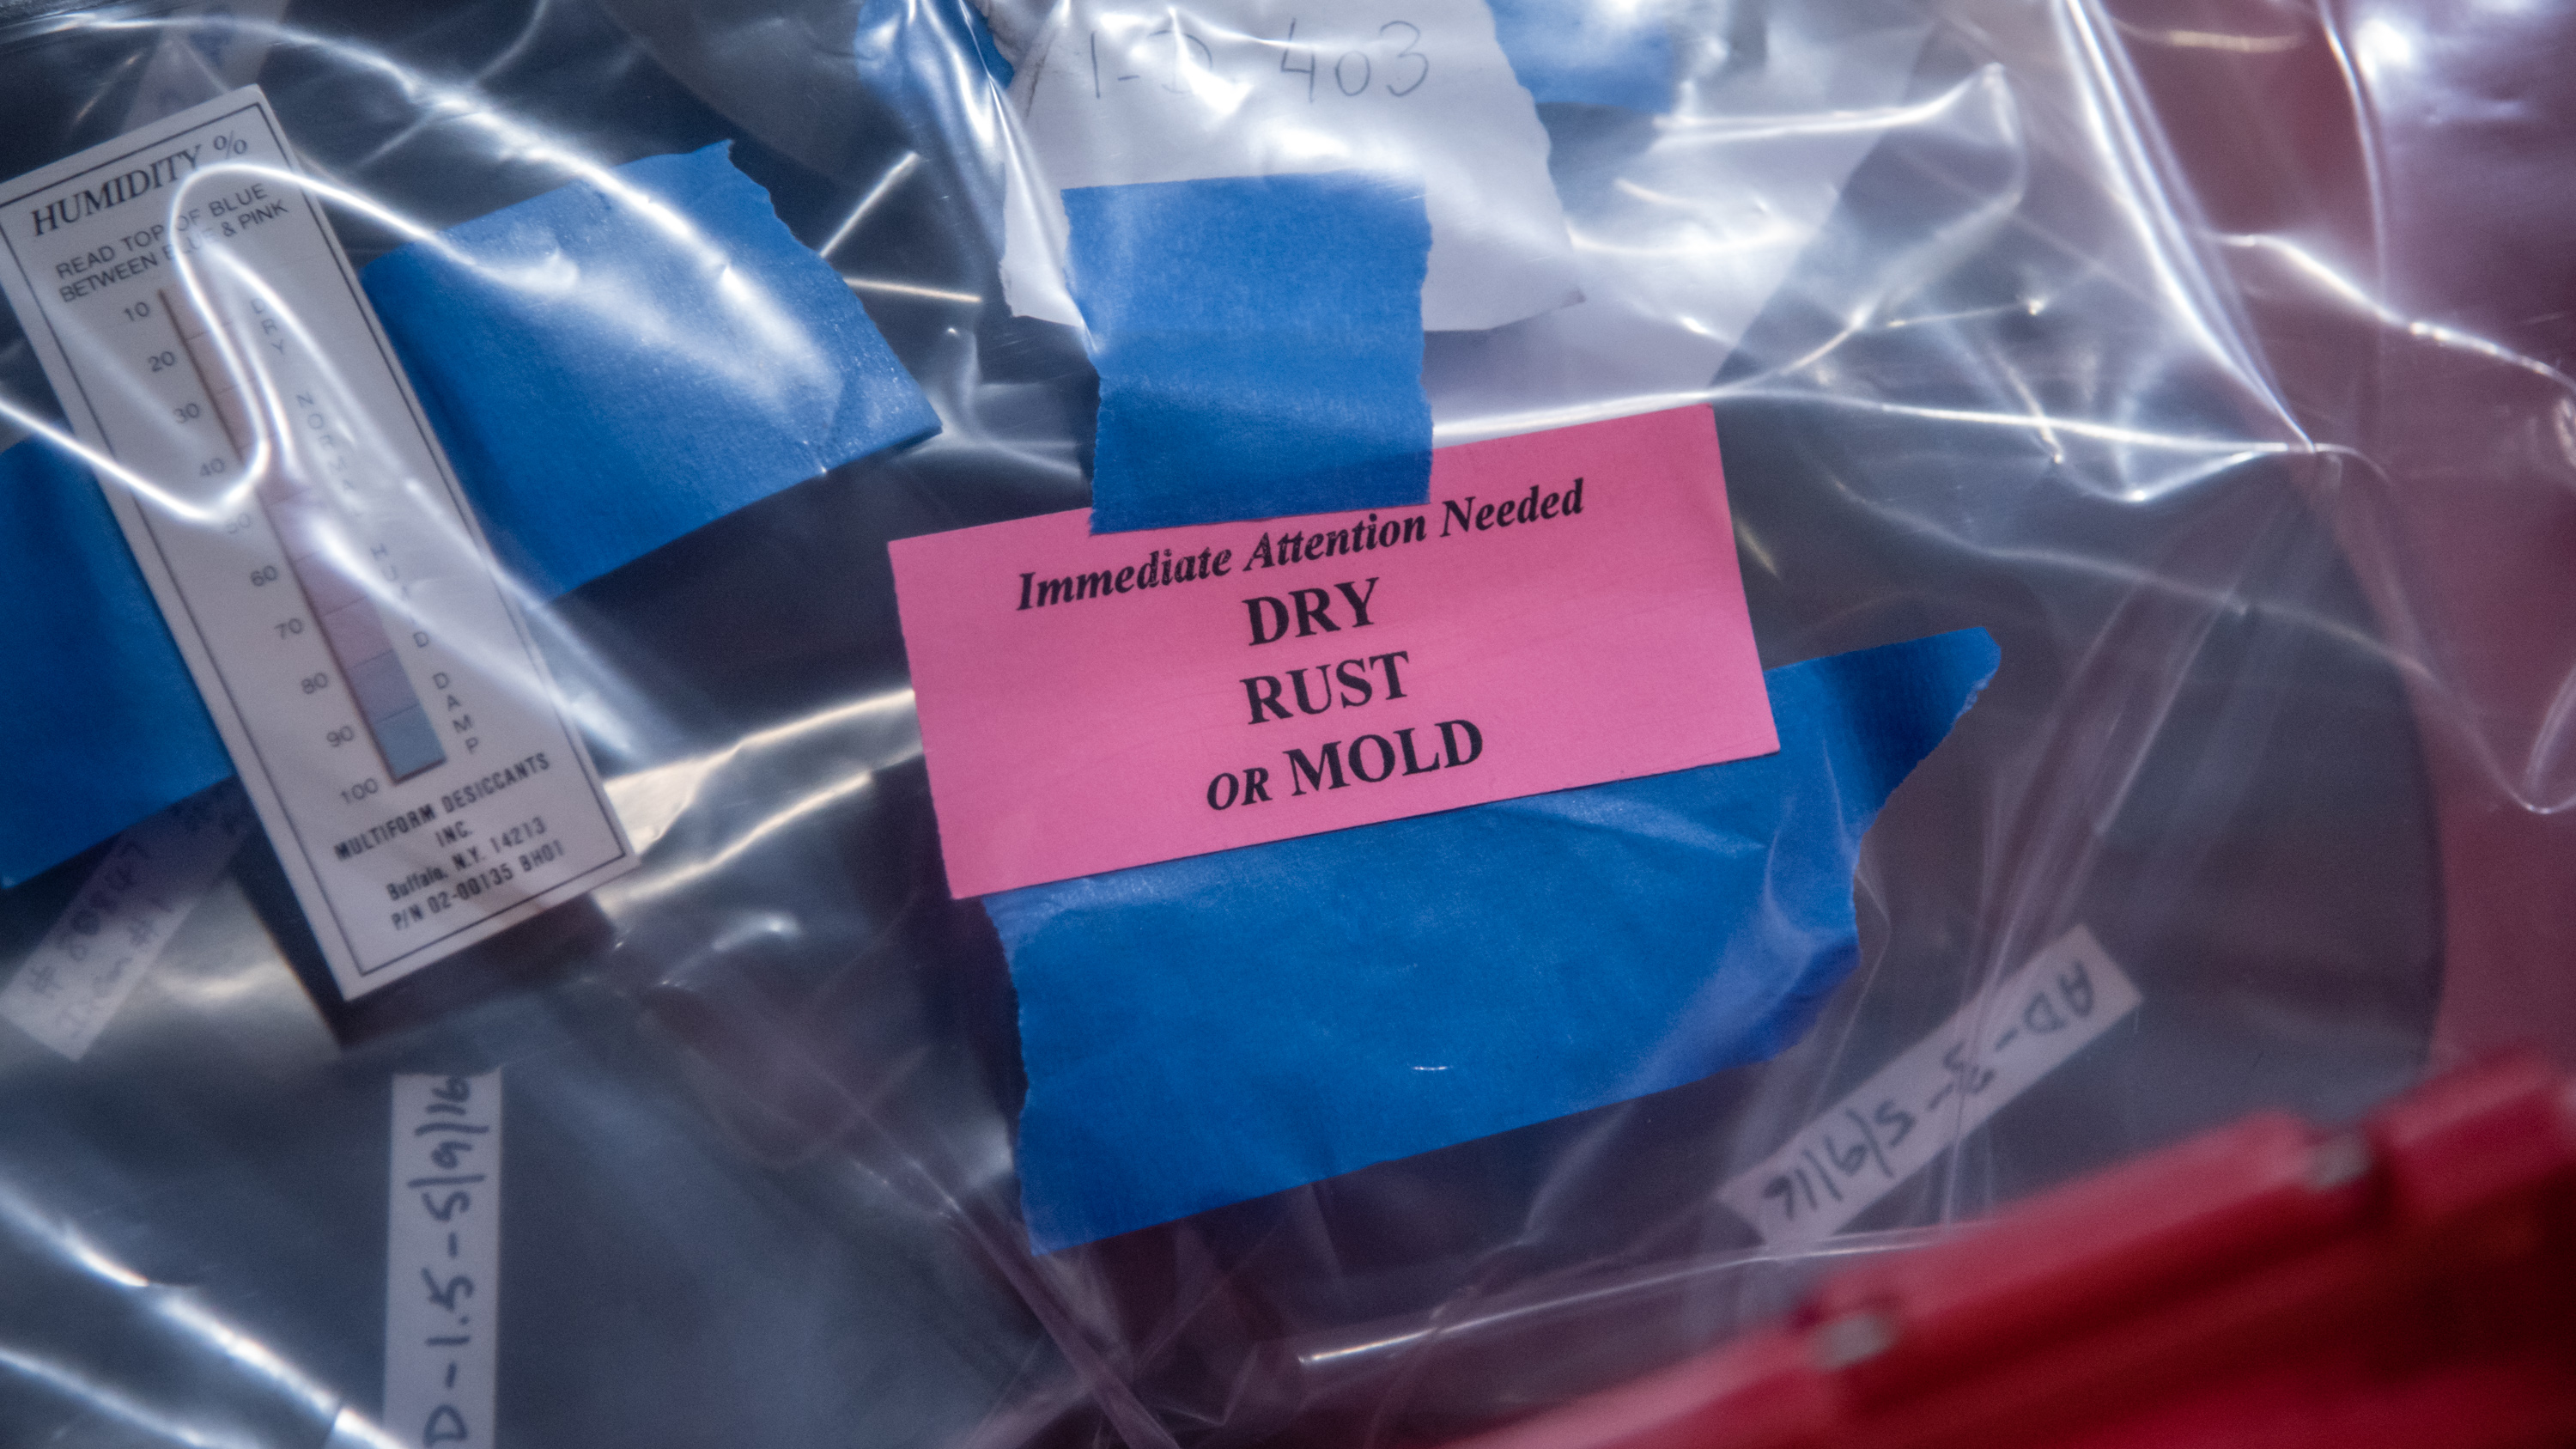 plastic bags containing various objects, a card affixed with blue tape reads "immediate attention needed, dry, rust or mold"